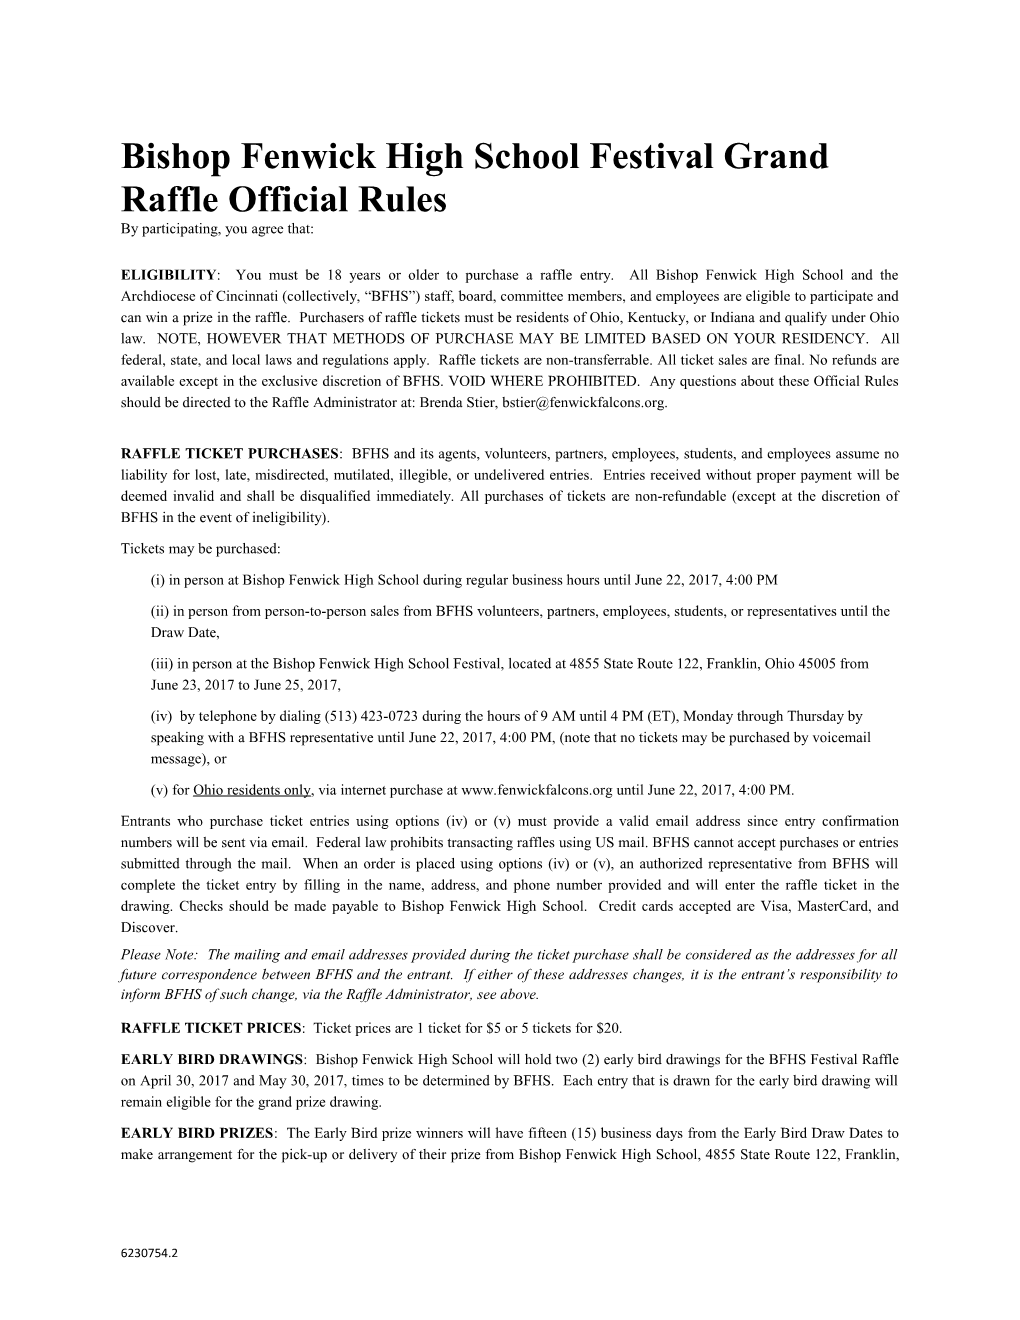 Bishop Fenwick High School Festival Grand Raffle Official Rules by Participating, You